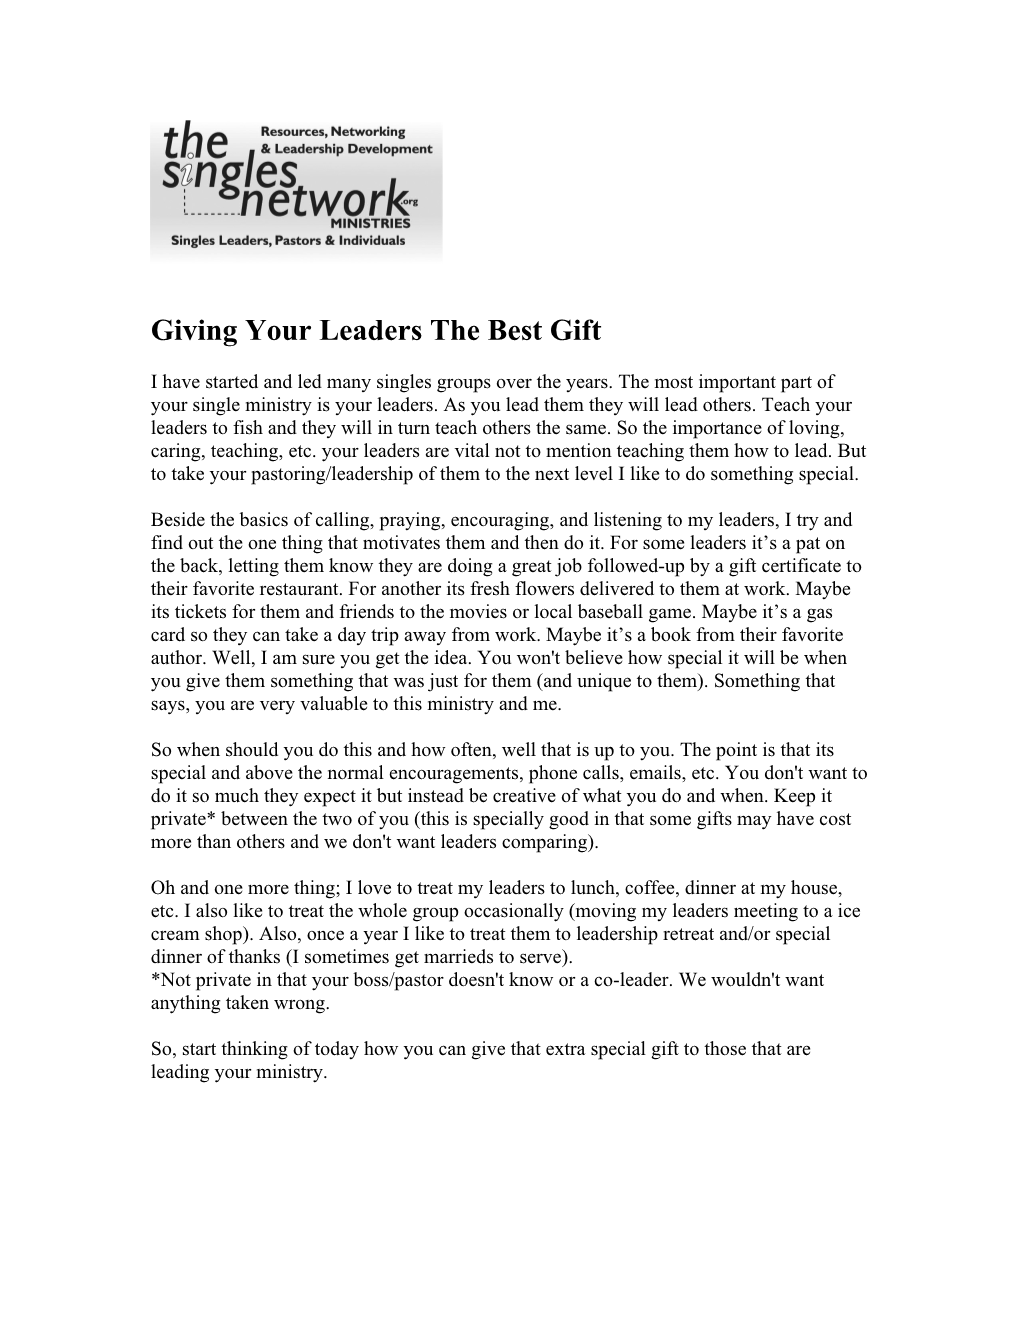 Giving Your Leaders the Best Gift